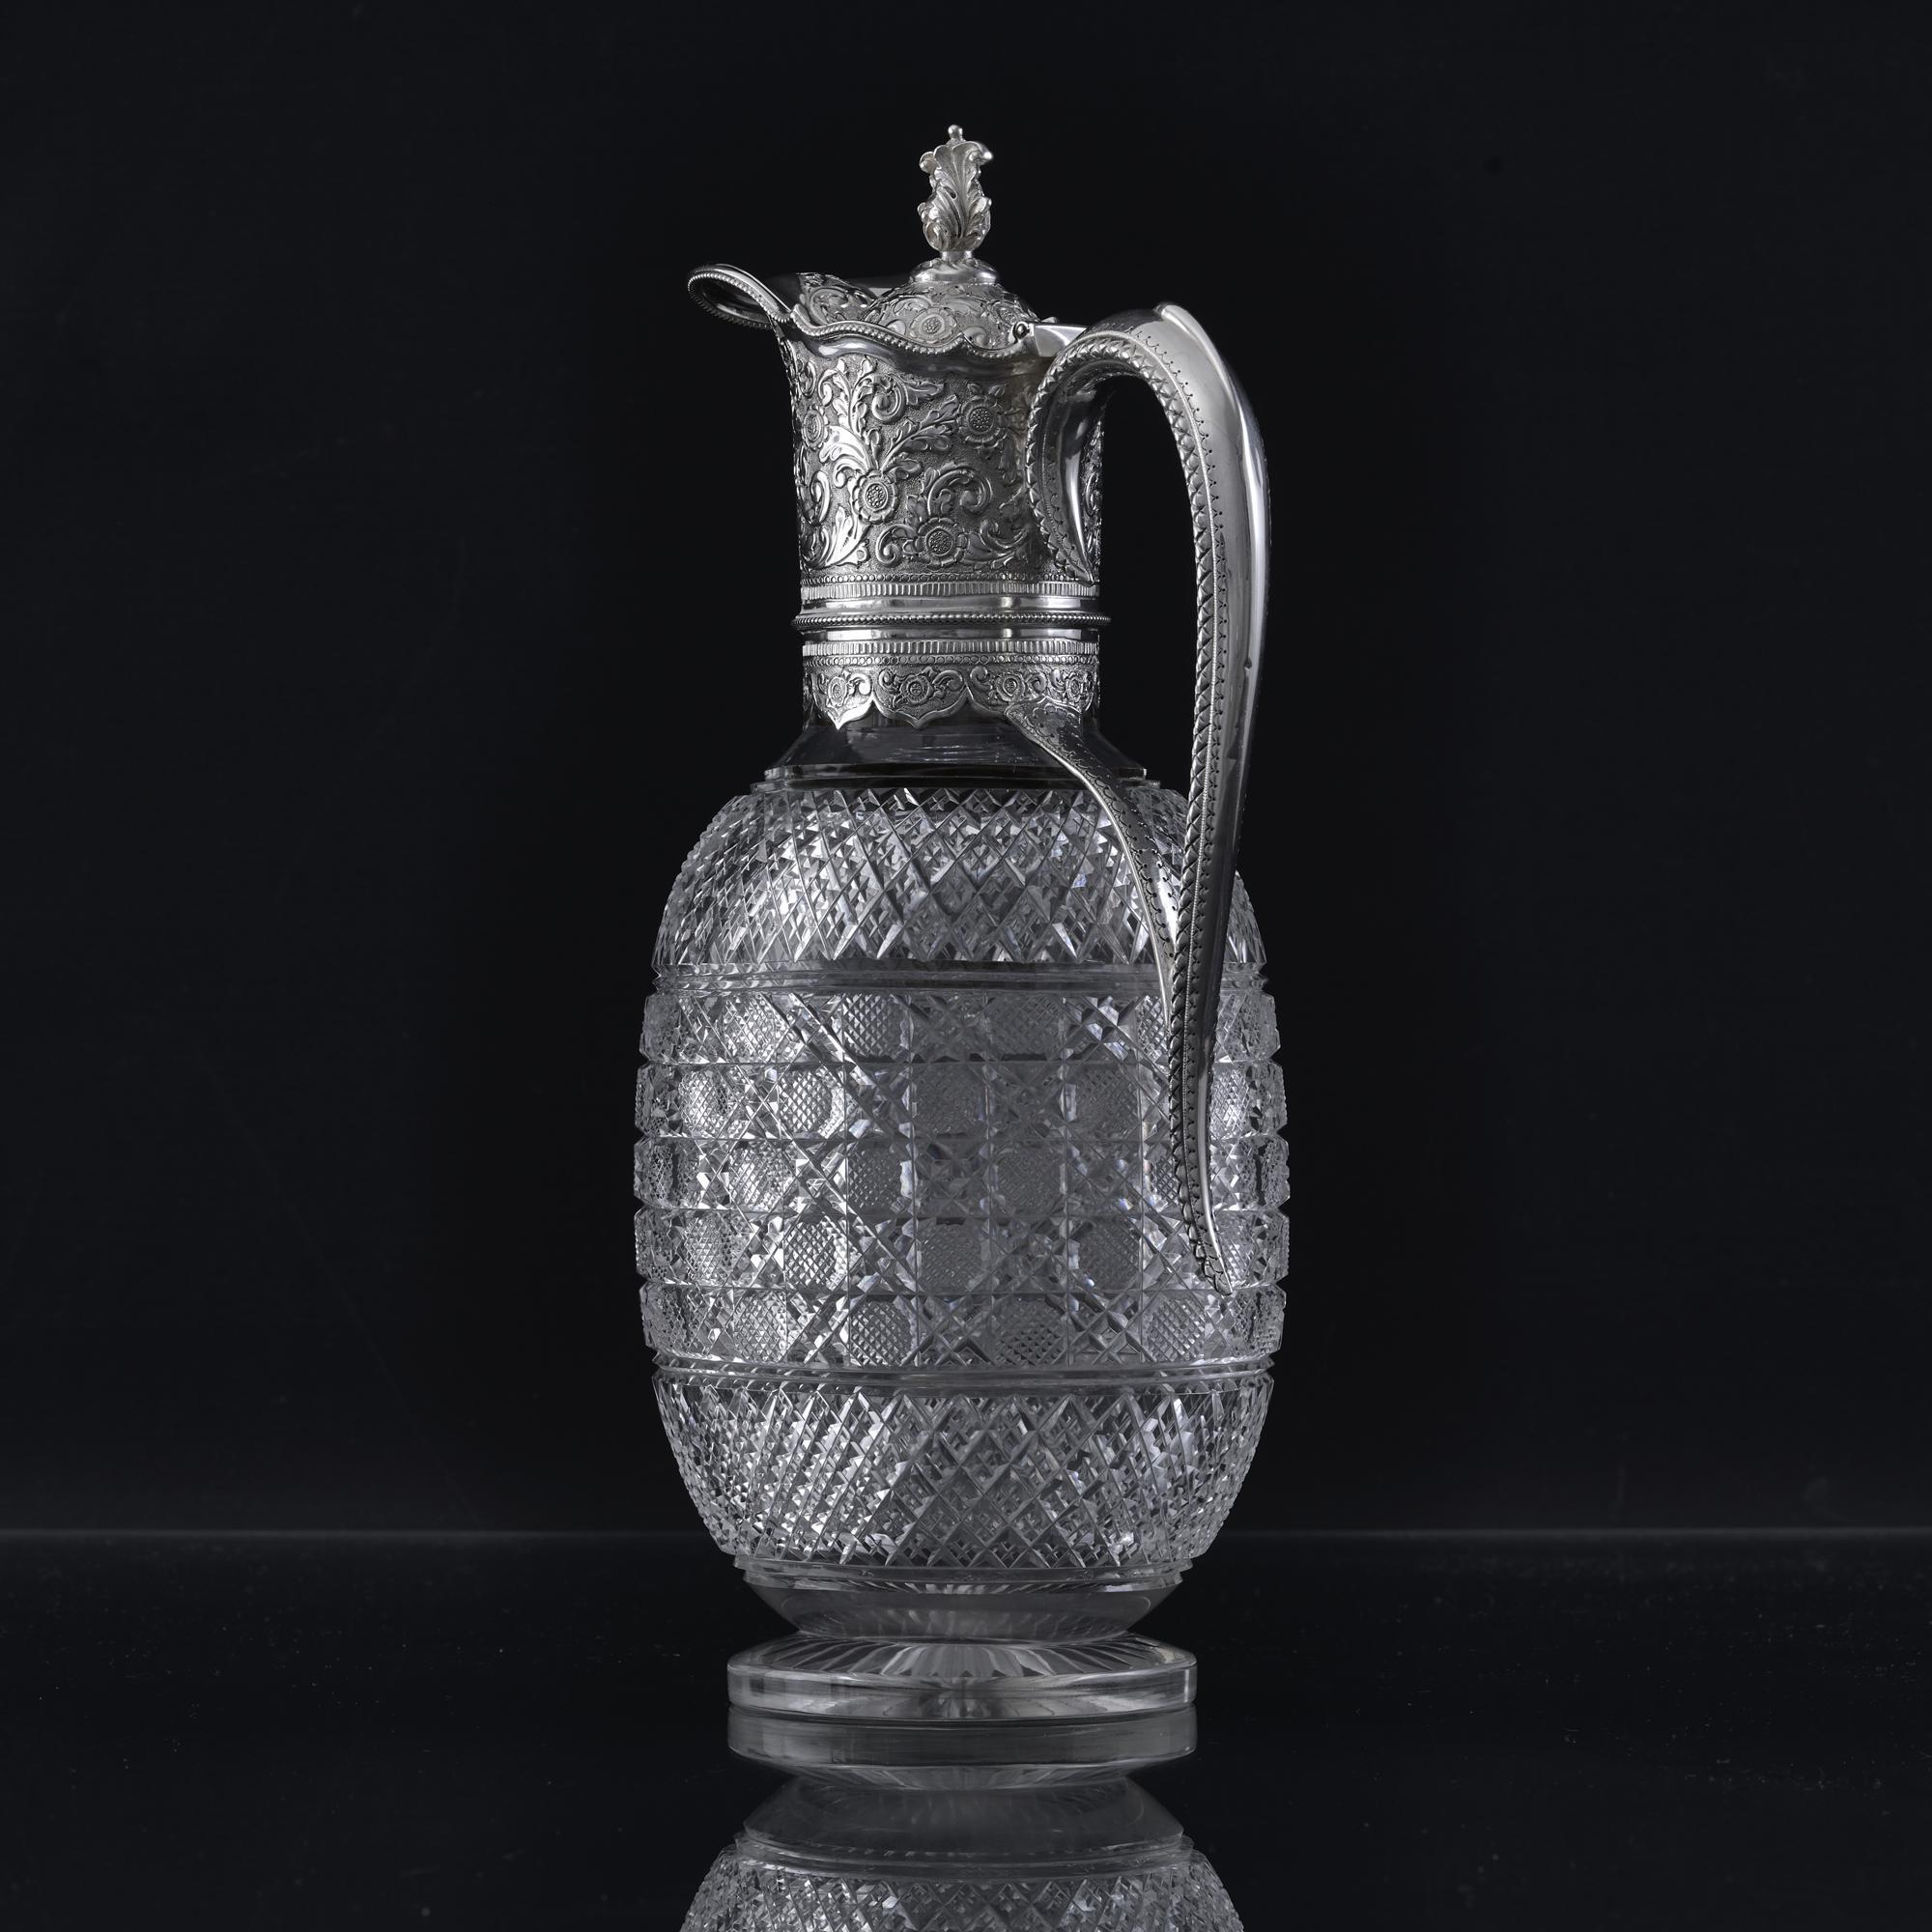 This antique Victorian wine jug has a round cut crystal body featuring three bands of lattice cut detail separated by sections of subtle leaf and flower decoration. The silver collar is hand-chased with bas-relief decoration of scrolling foliage